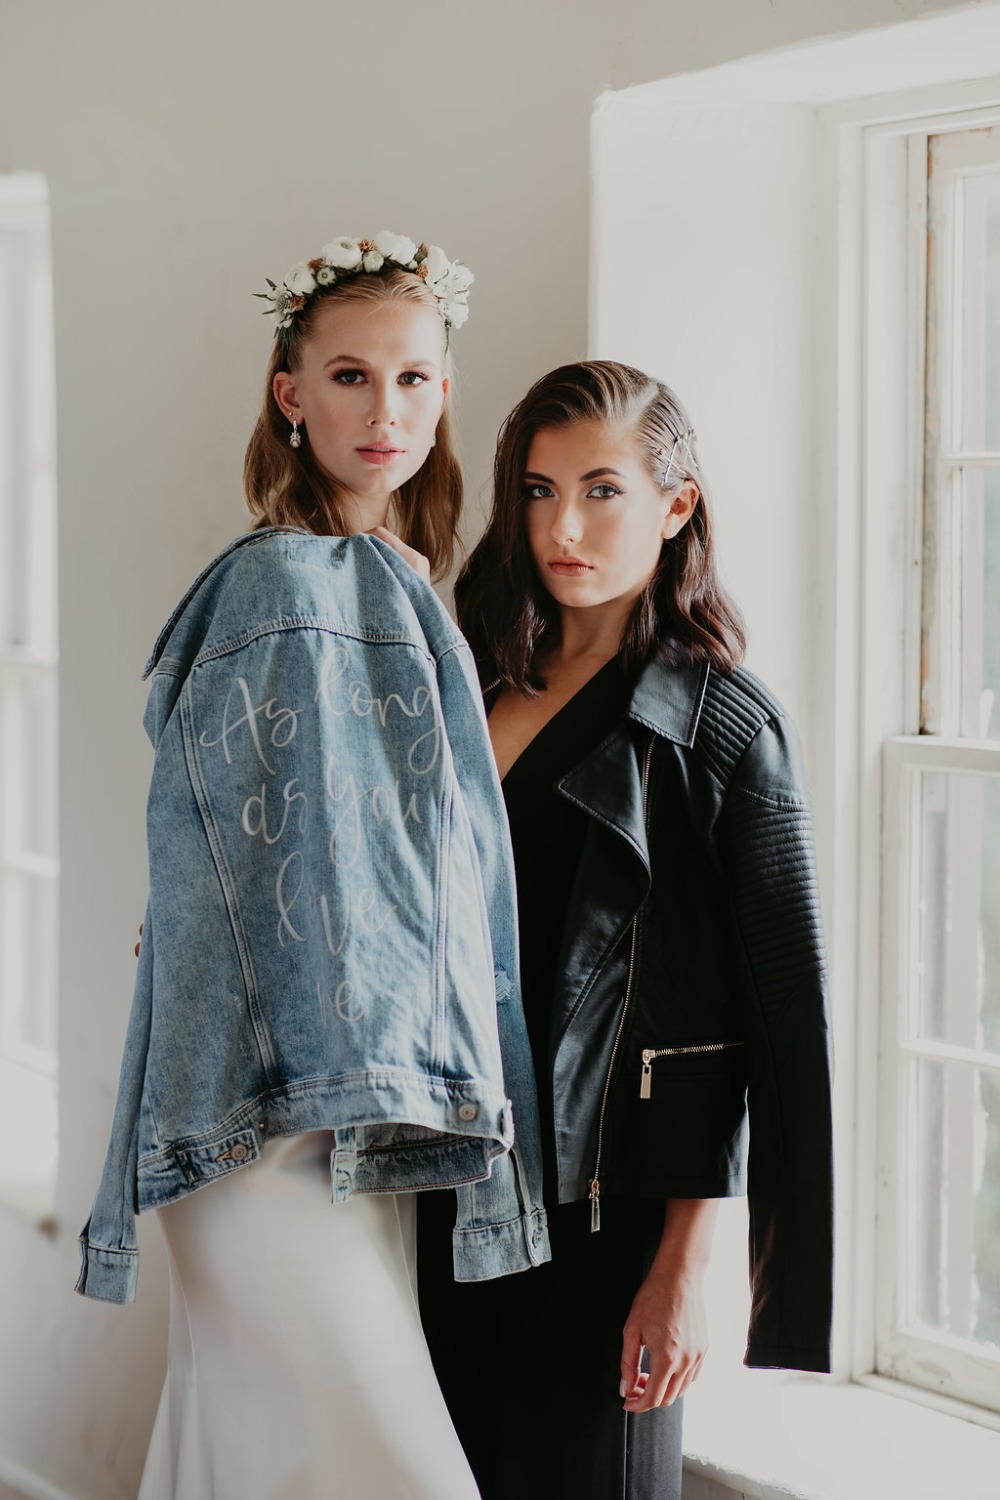 bride and bridesmaid modern style